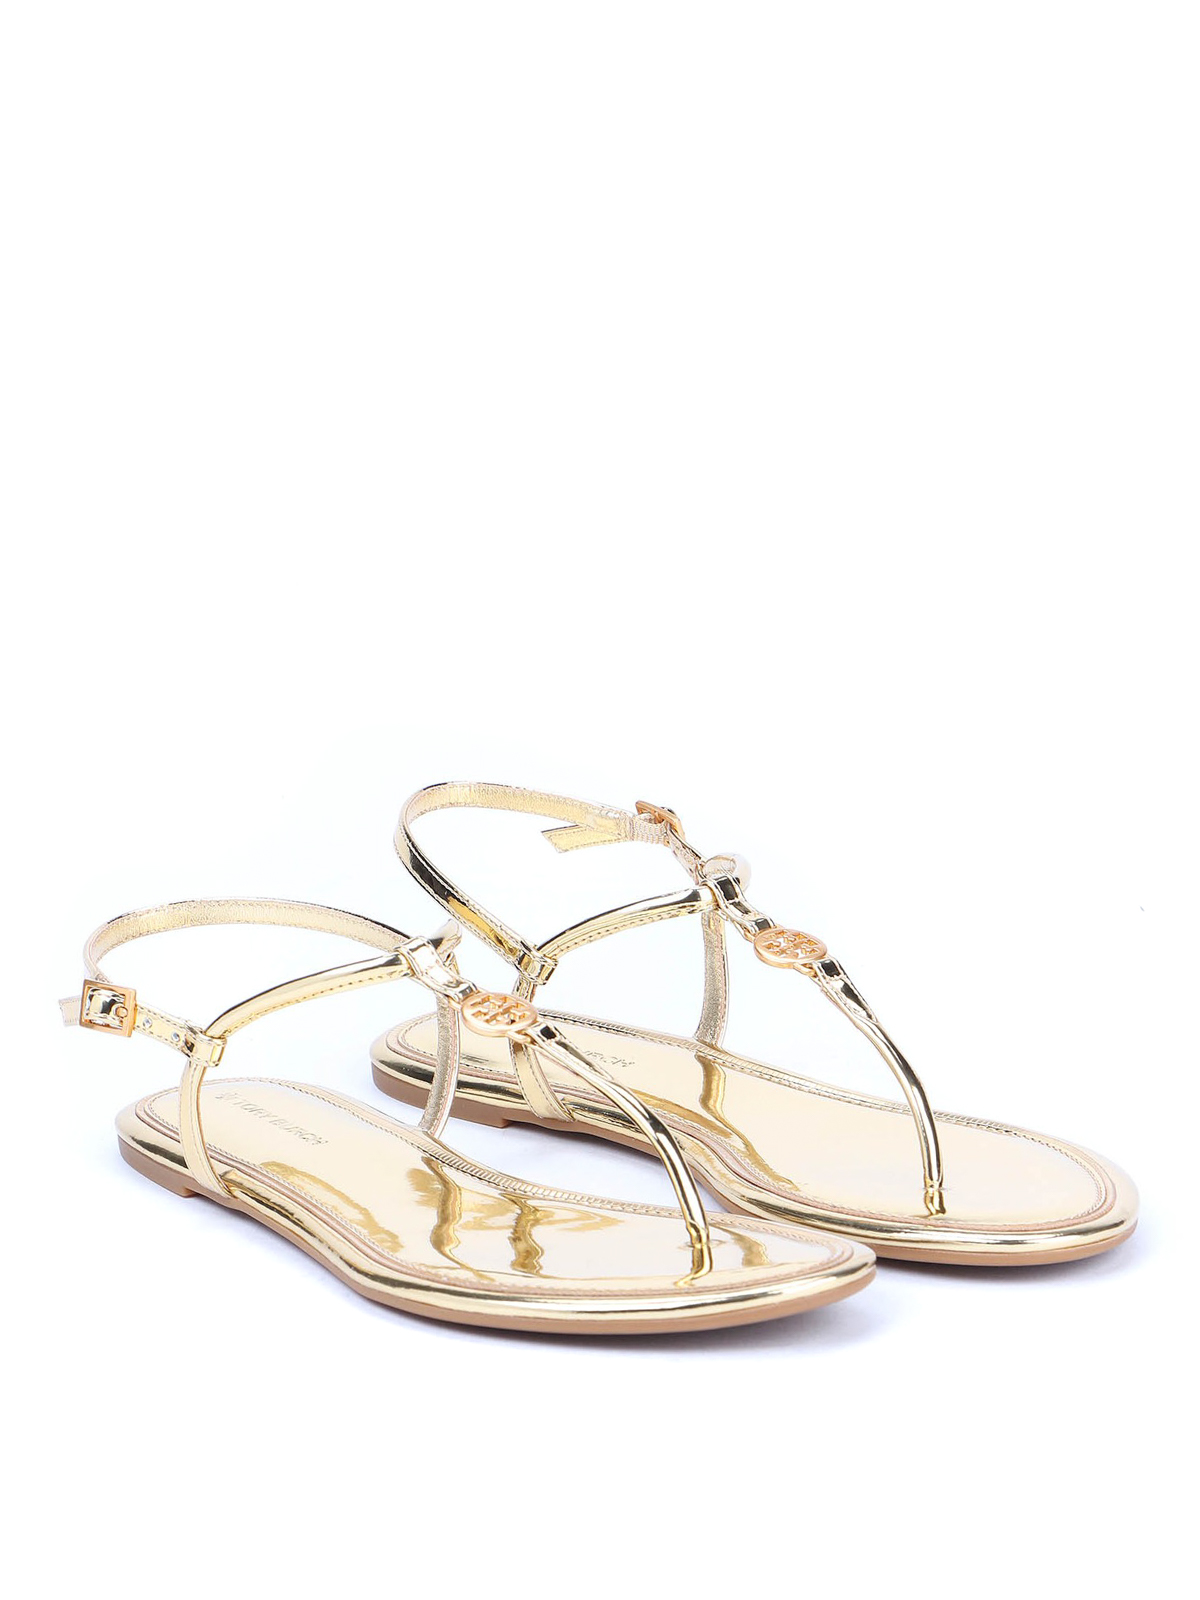 Sandals Tory Burch - Emmy metallic leather thong sandals - 65178701